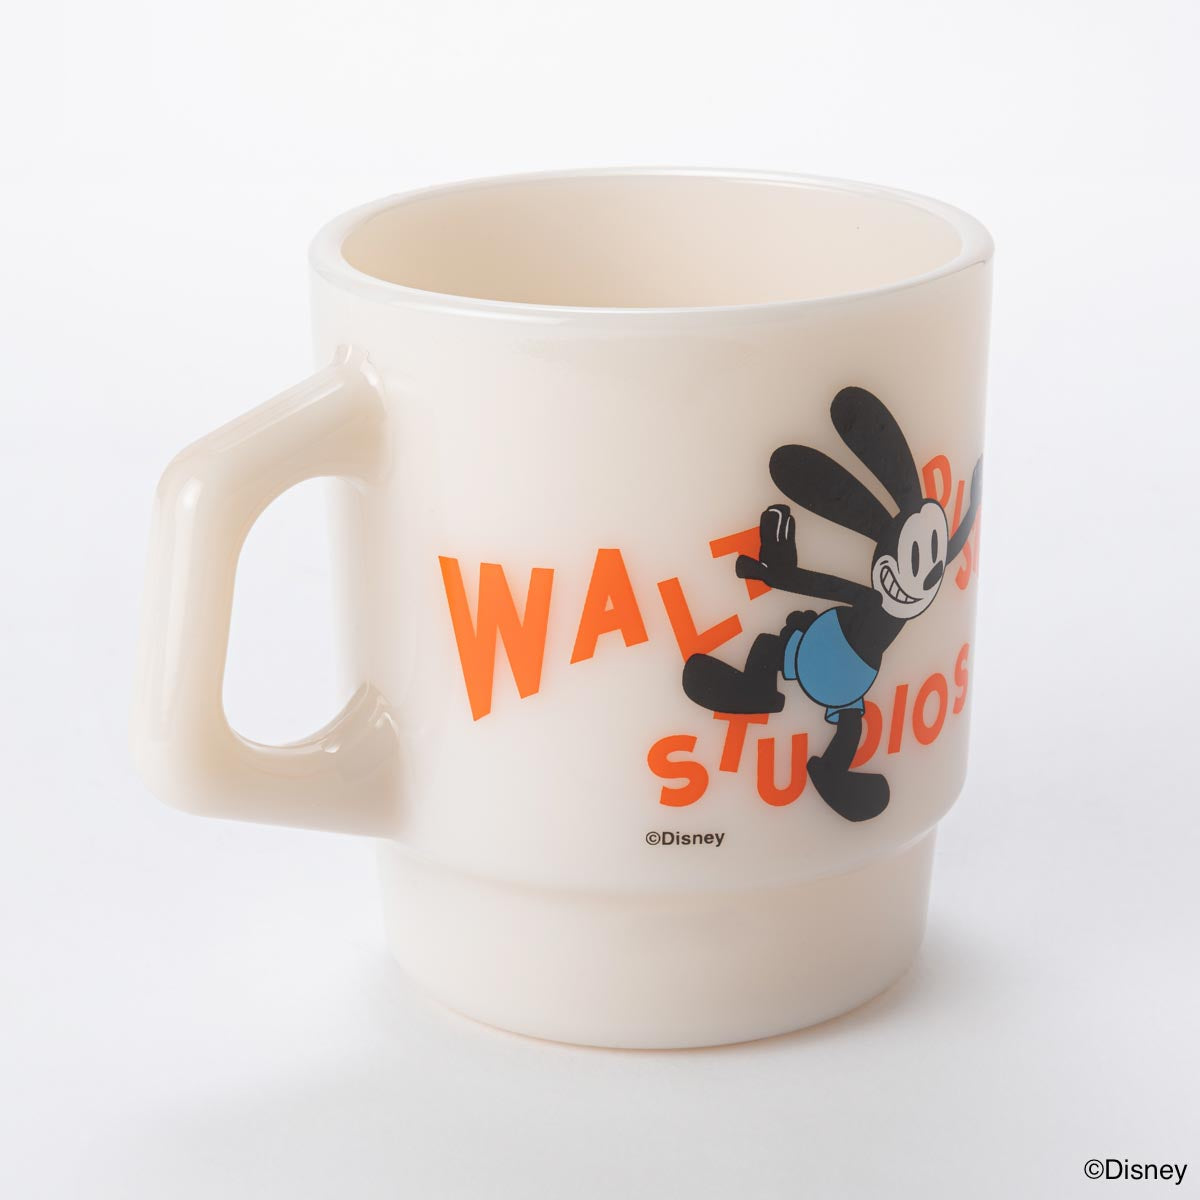 Fire-King スタッキングマグ Oswald the Lucky Rabbit [Disney100 OSWALD] ライトアイボリー